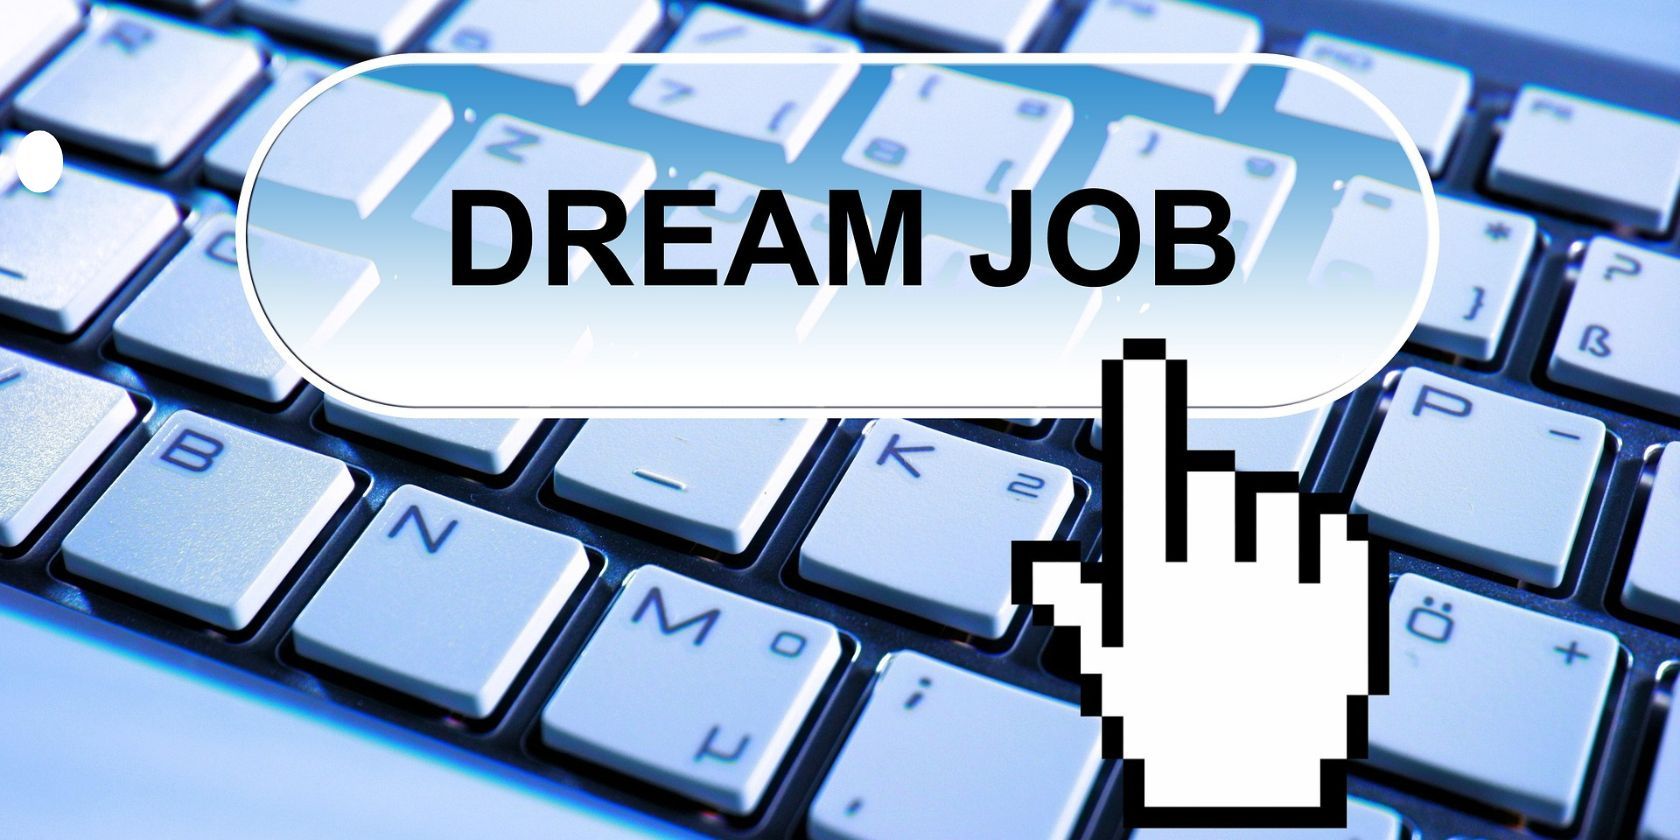 pixel image of a hand clicking "dream job" placed on the foreground of a keyboard  